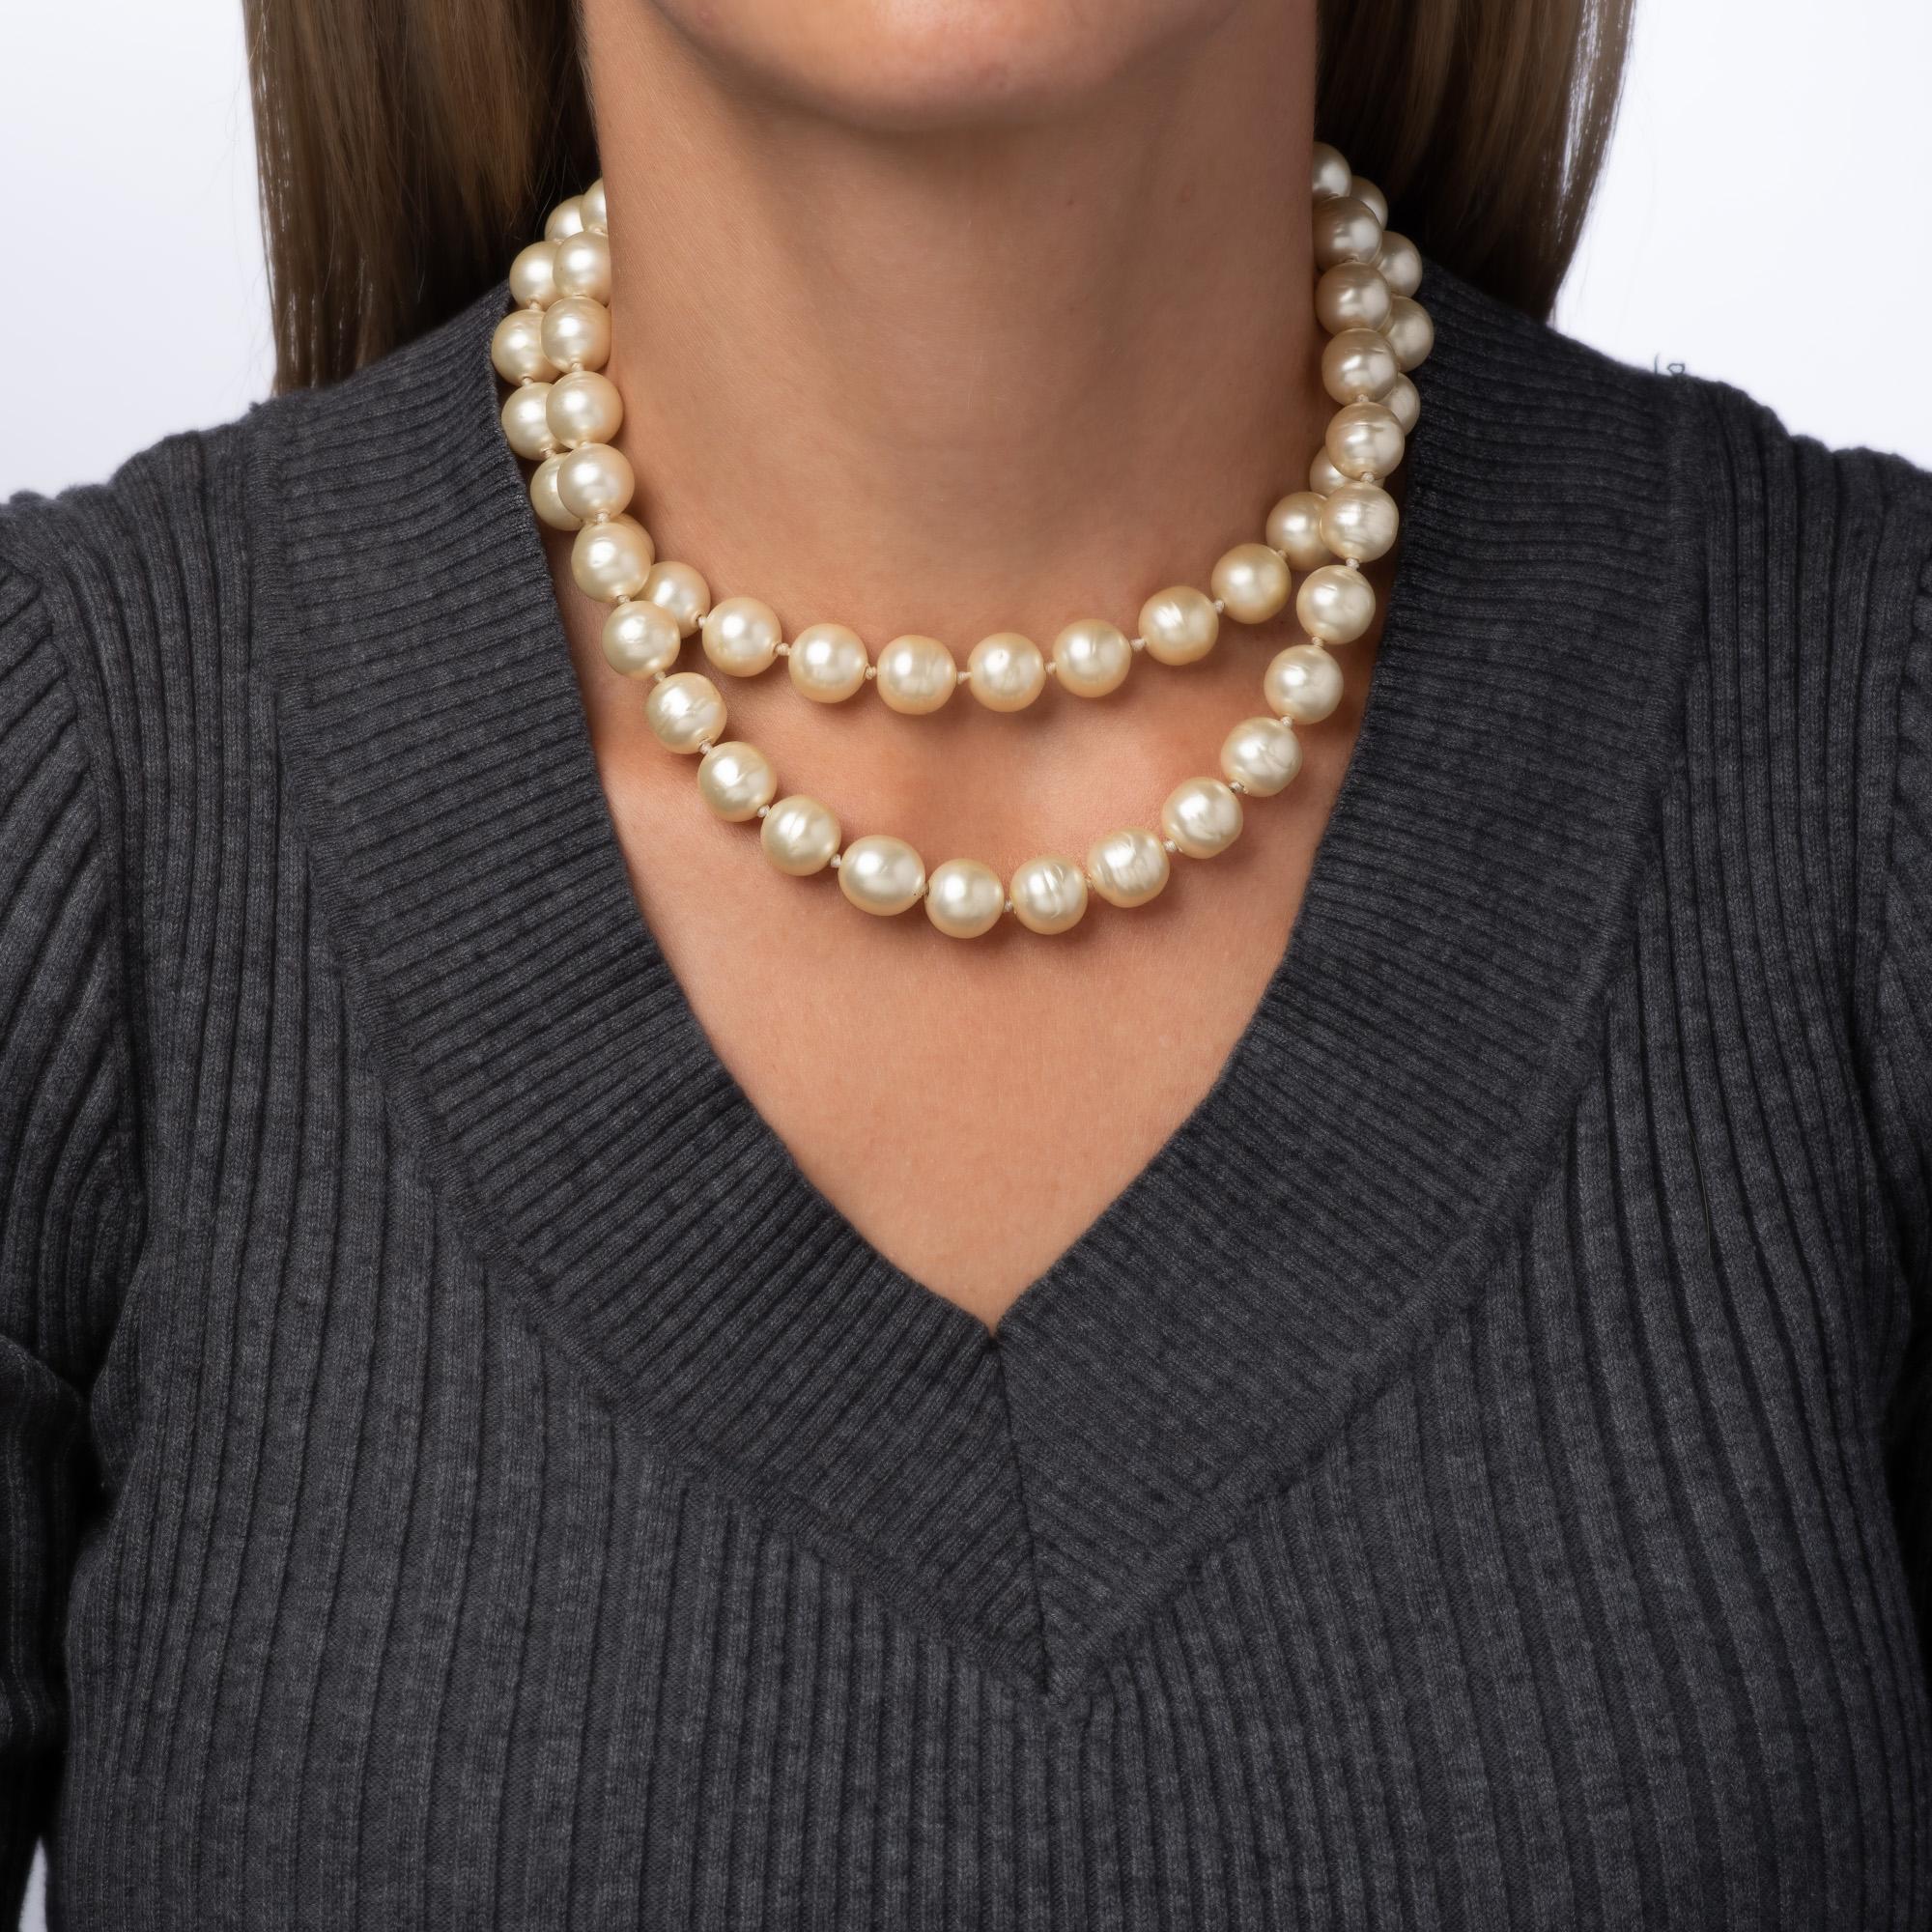 Vintage Chanel double-strand choker necklace finished with a crystal and blue stone textured Gripoix clasp (circa 1995). 

The necklace features 12mm faux pearls of irregular shape with a crystal and blue stone set Gripoix clasp. Measuring 16 inches